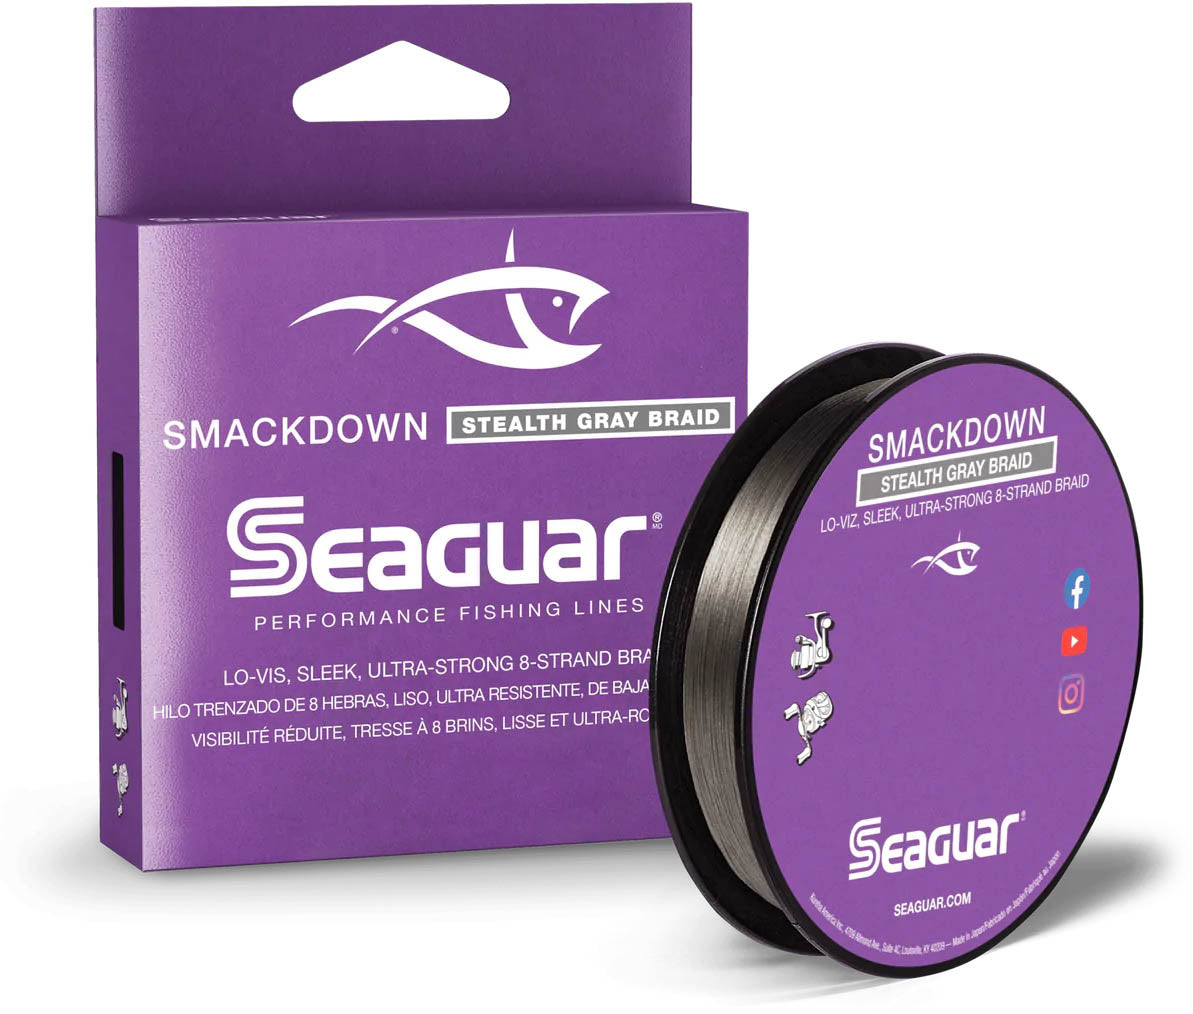 Seaguar Smackdown Braid 300 Yards Stealth Gray — Discount Tackle